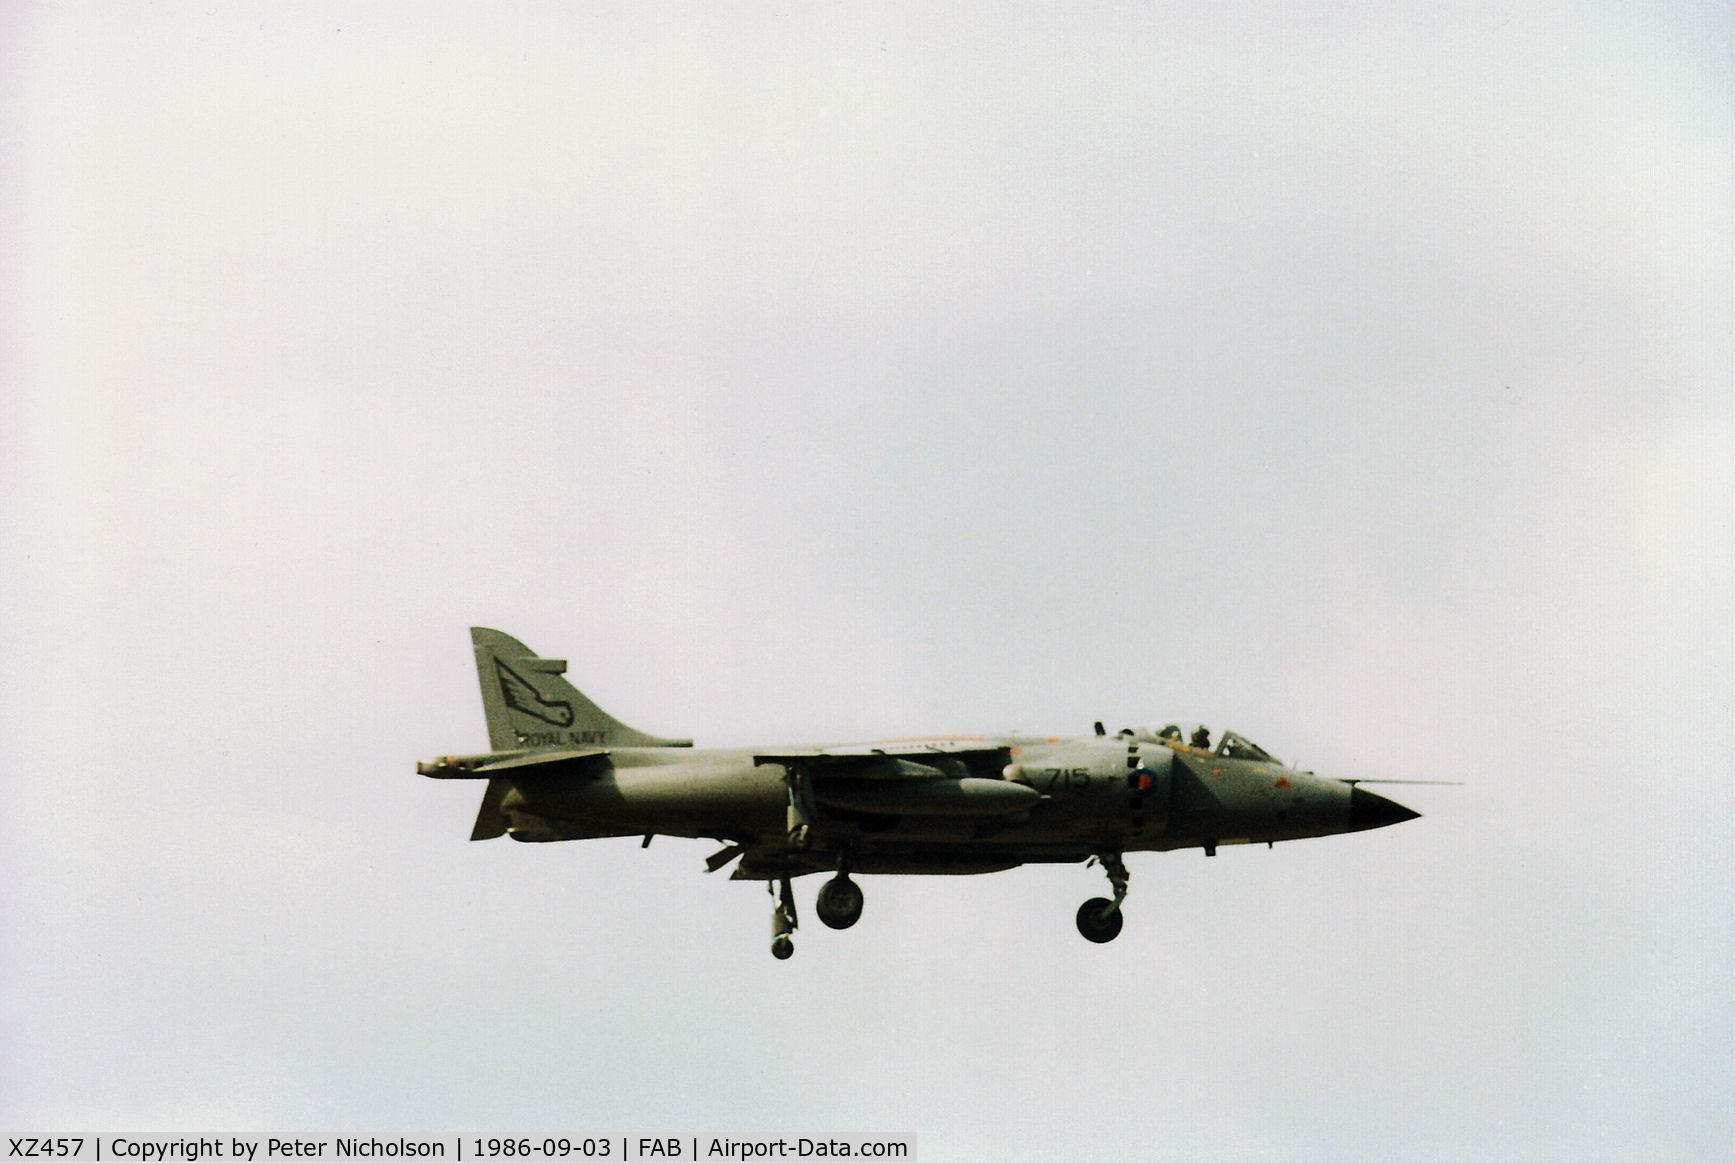 XZ457, 1979 British Aerospace Sea Harrier FRS.1 C/N 41H-912011, This Sea Harrier FRS.1 of 899 Squadron at RNAS Yeovilton was flown at the 1986 Farnborough Airshow.